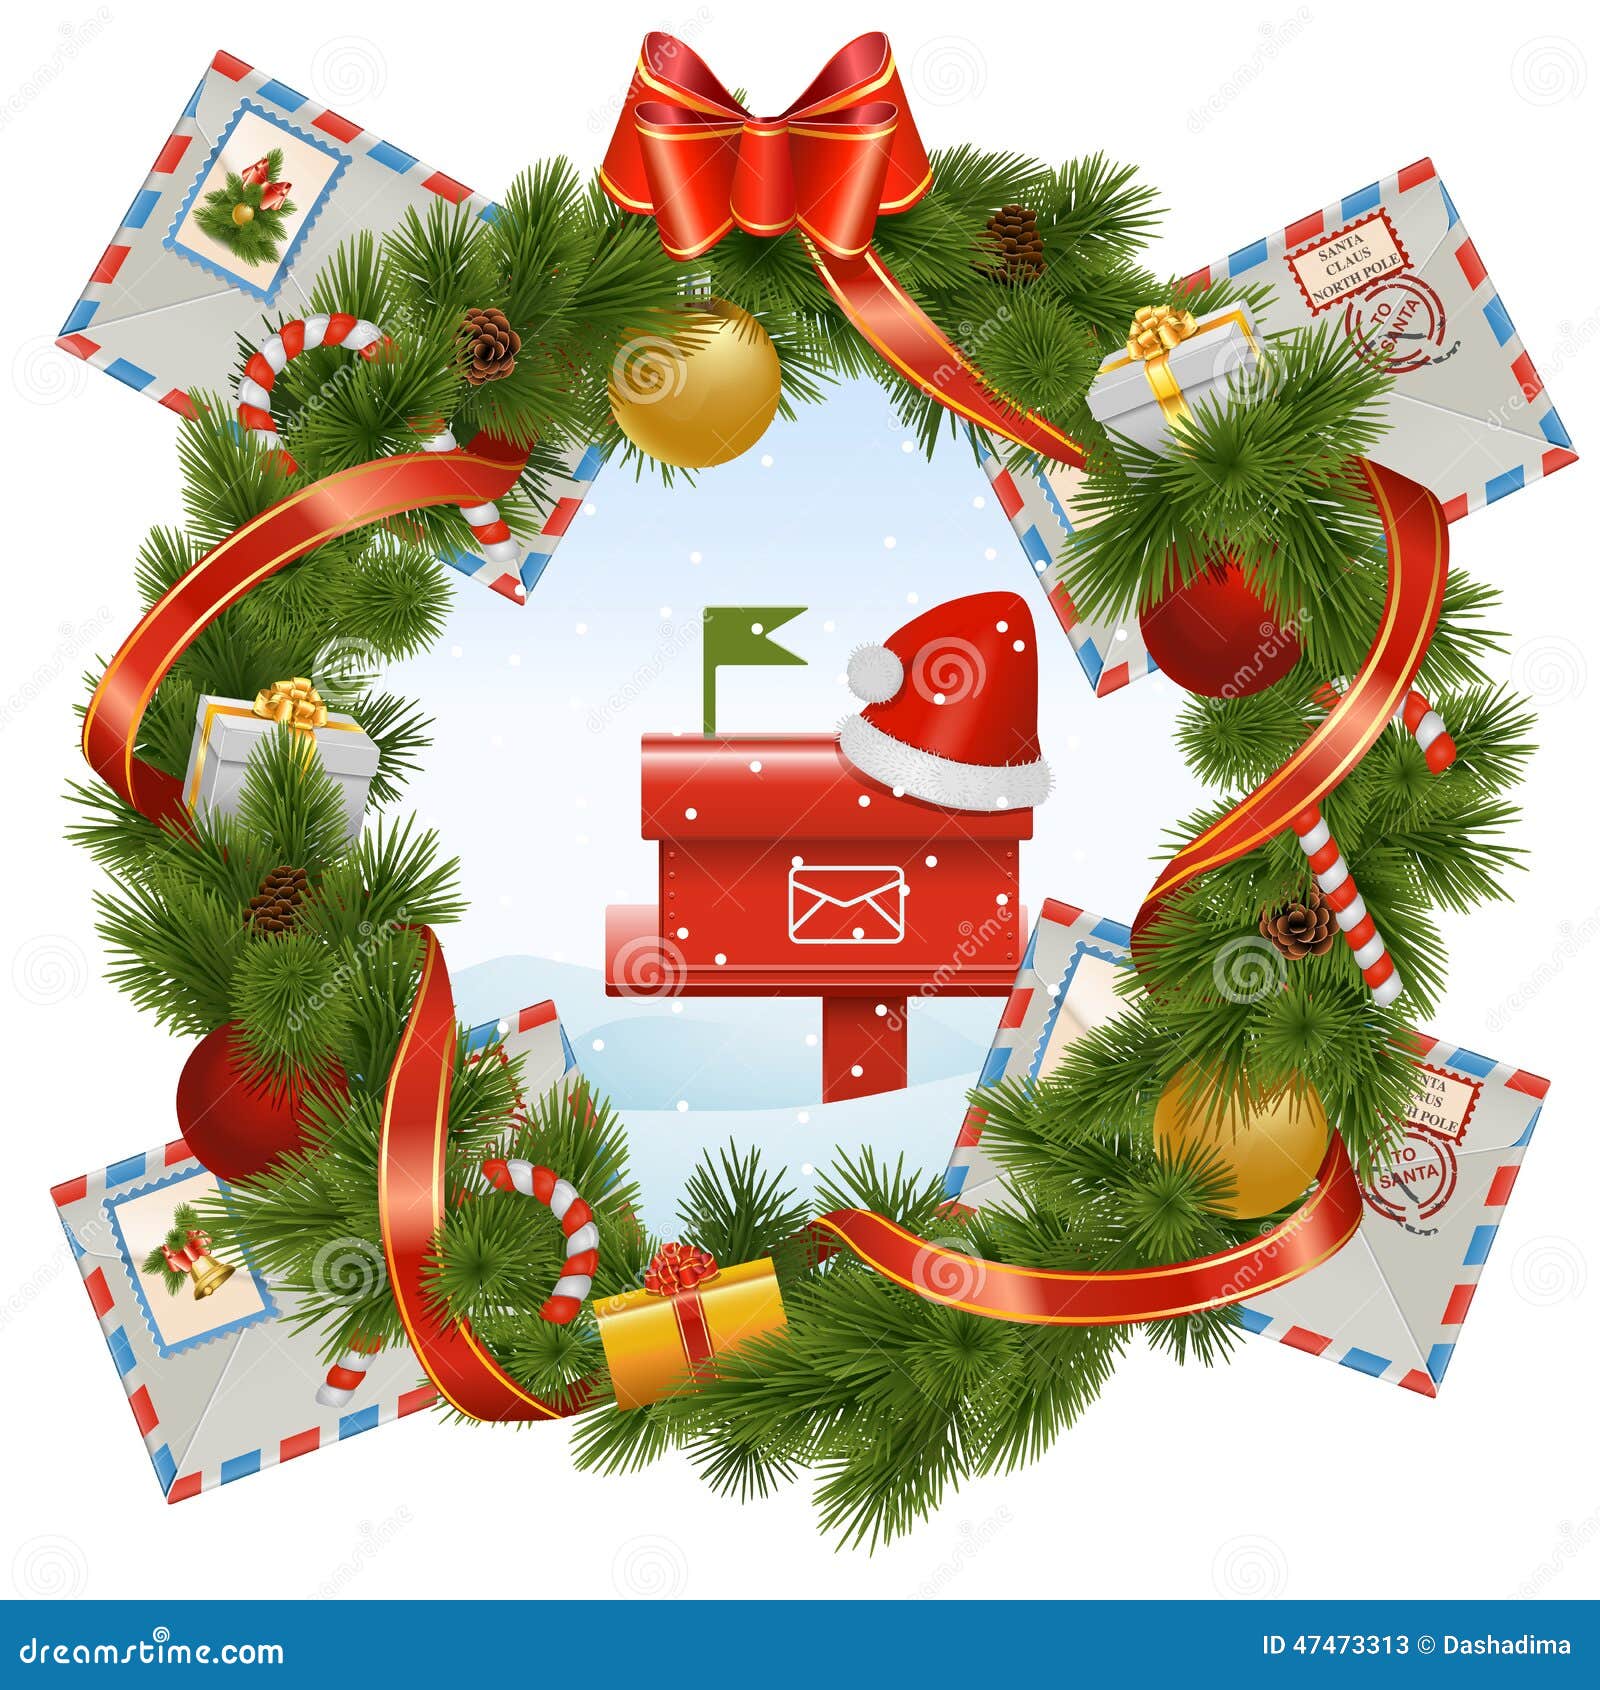 https://thumbs.dreamstime.com/z/vector-christmas-wreath-mailbox-isolated-white-background-47473313.jpg